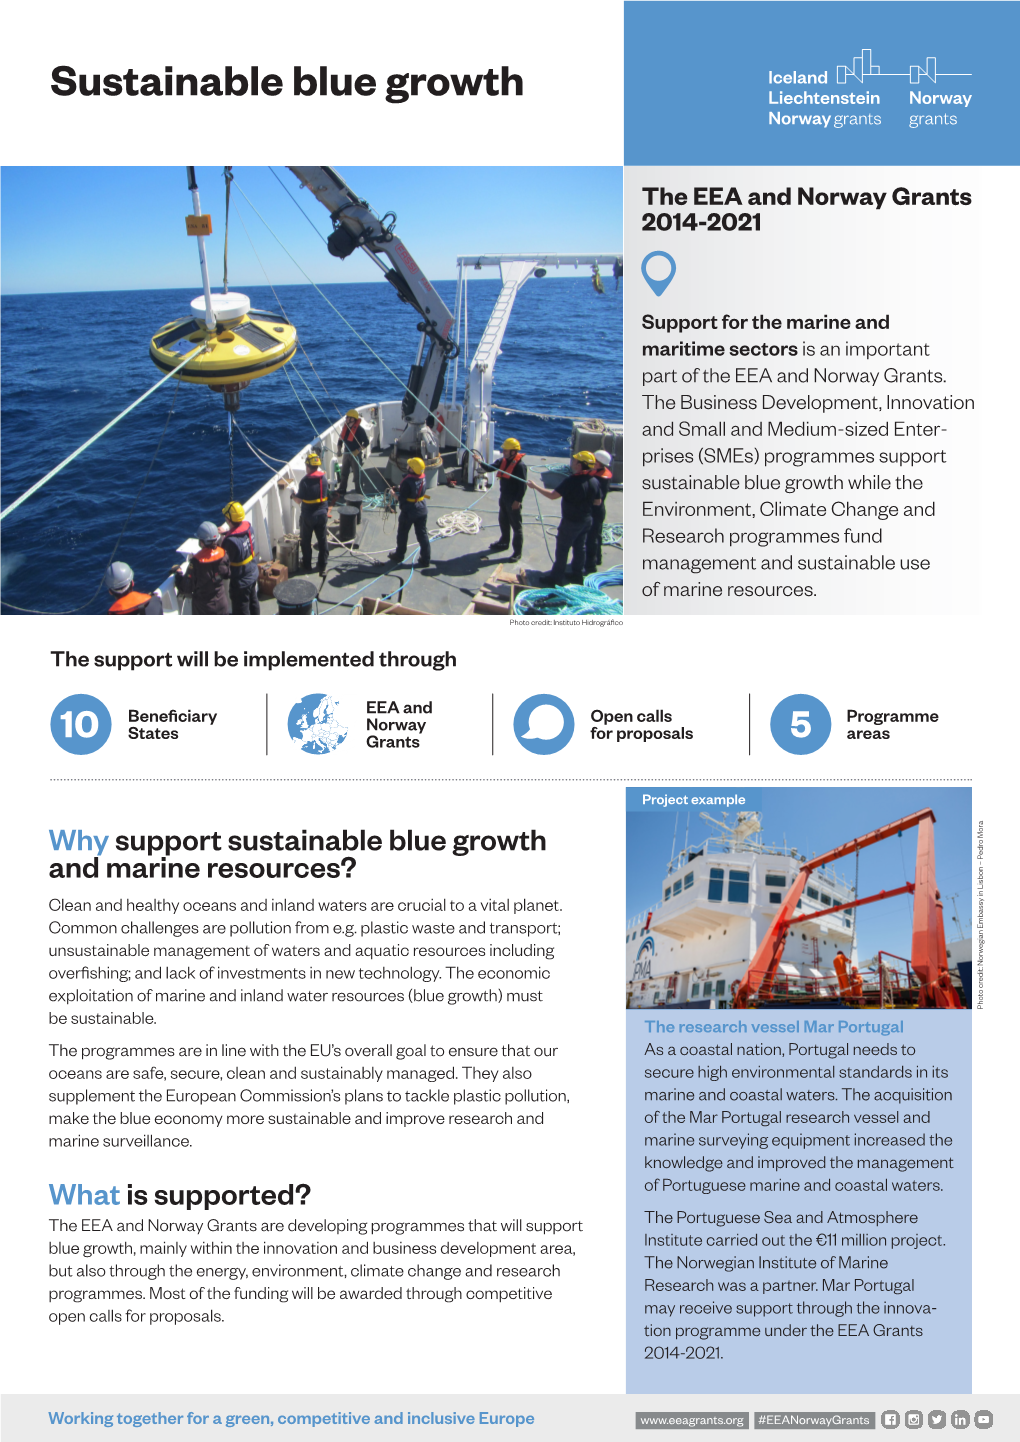 Sustainable Blue Growth